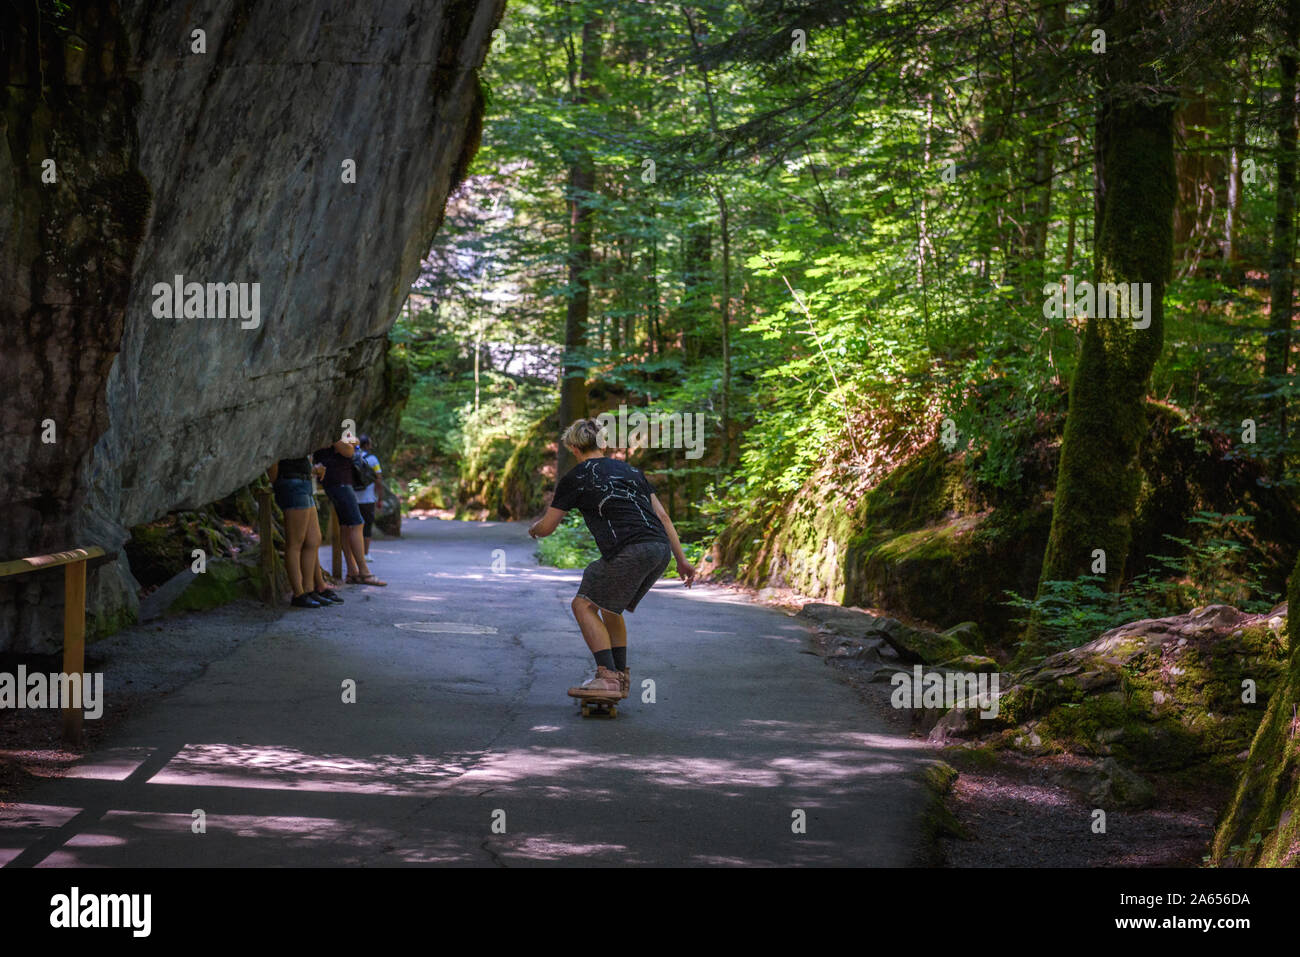 Skater riding a skateboard on a road towards the Blausee Lake in Switzerland Stock Photo